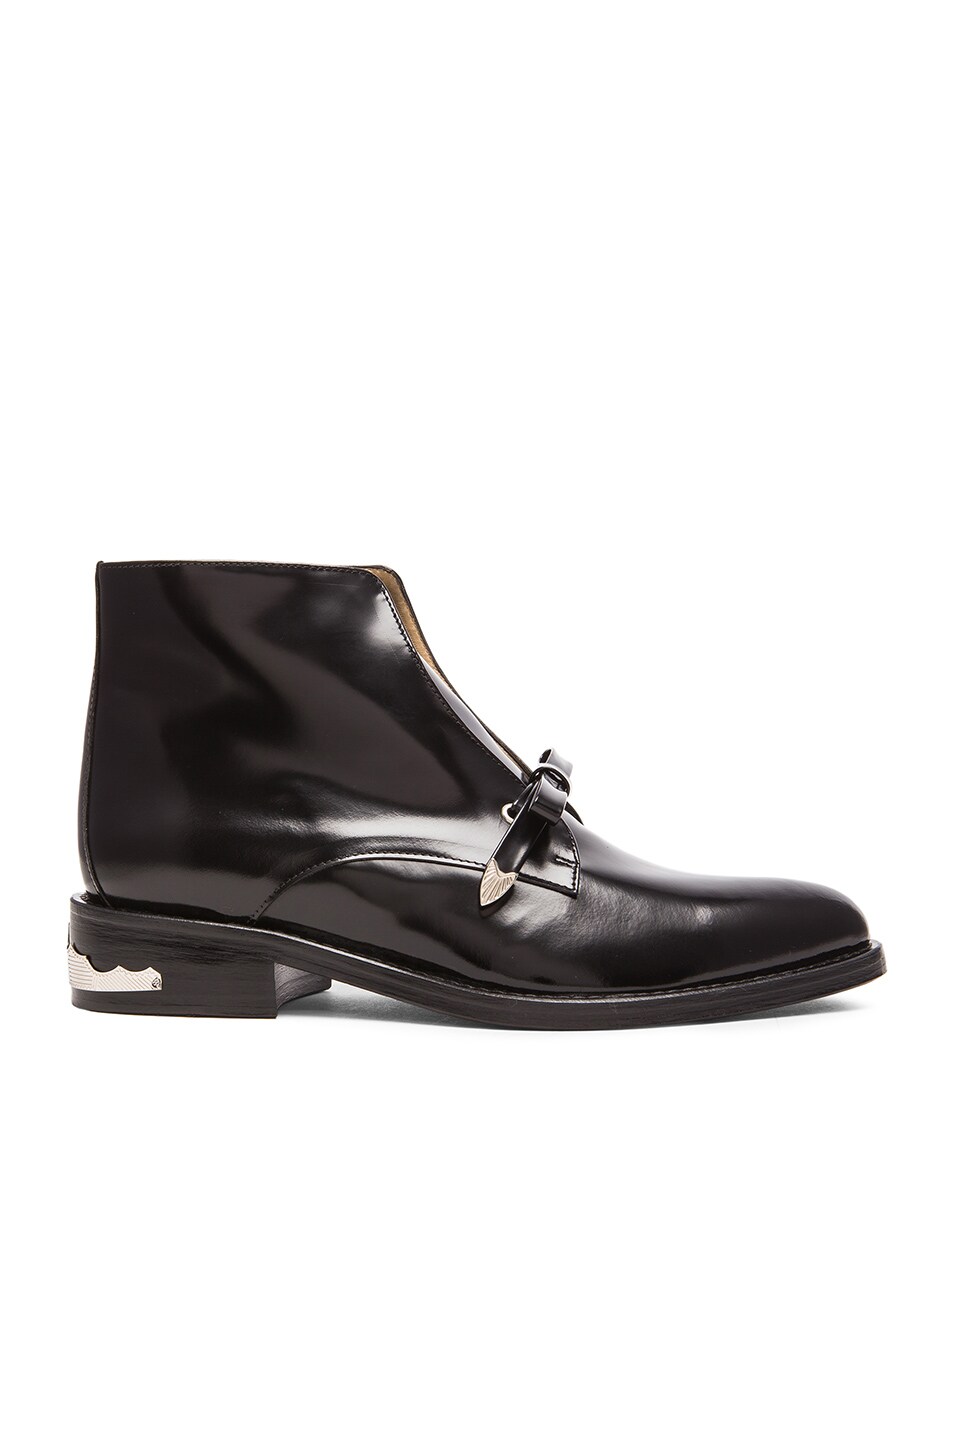 Image 1 of TOGA PULLA Single Strap Patent Leather Booties in Black Polido